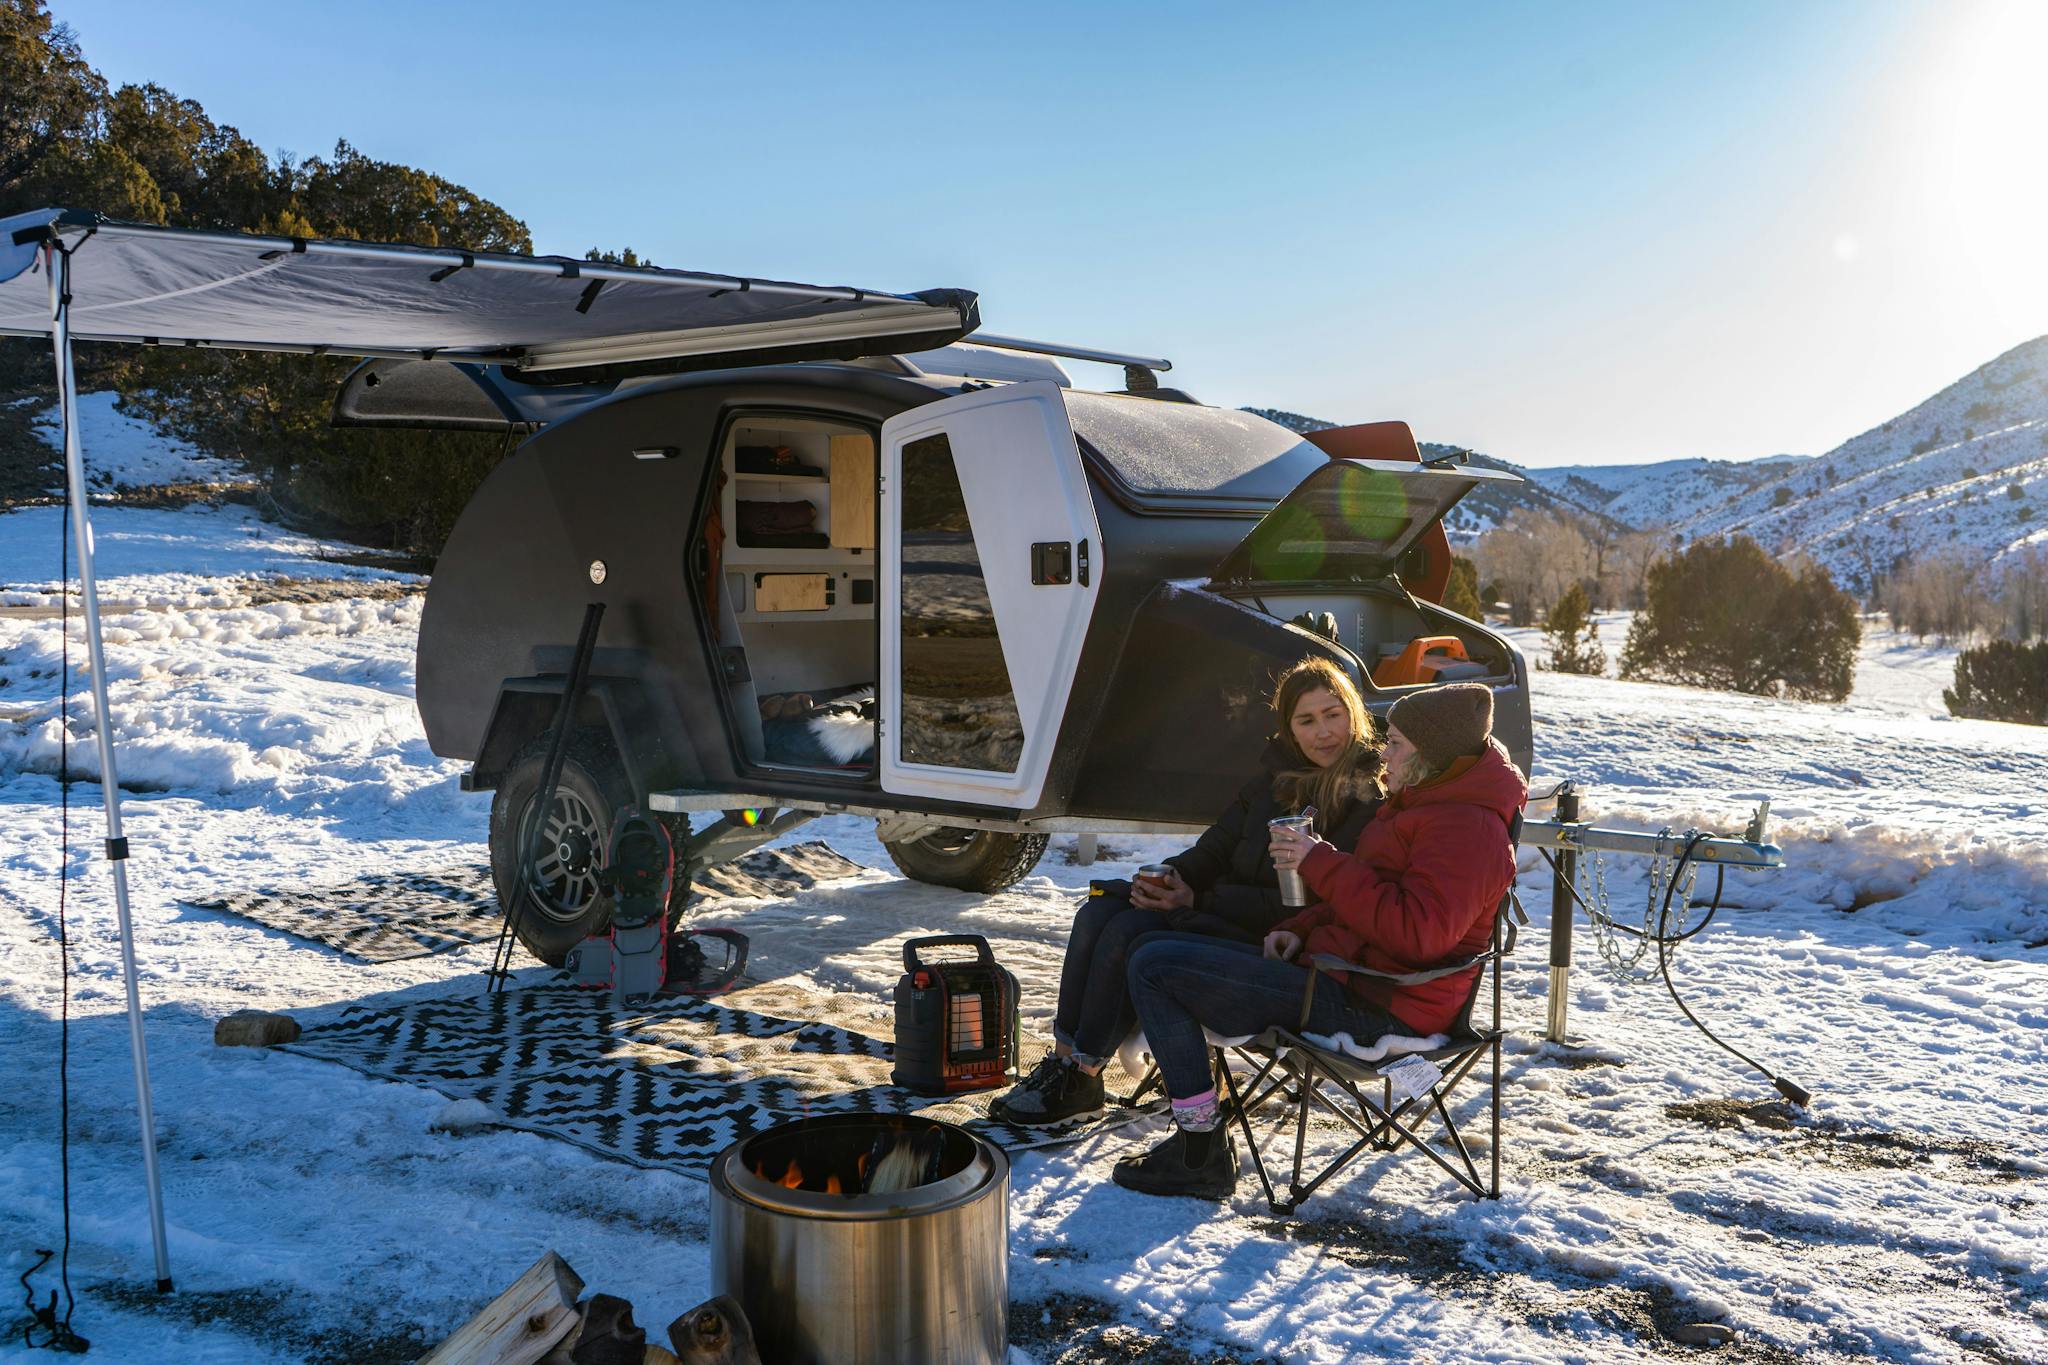 Winter camping in an adventure camper, enjoying time around the fire.